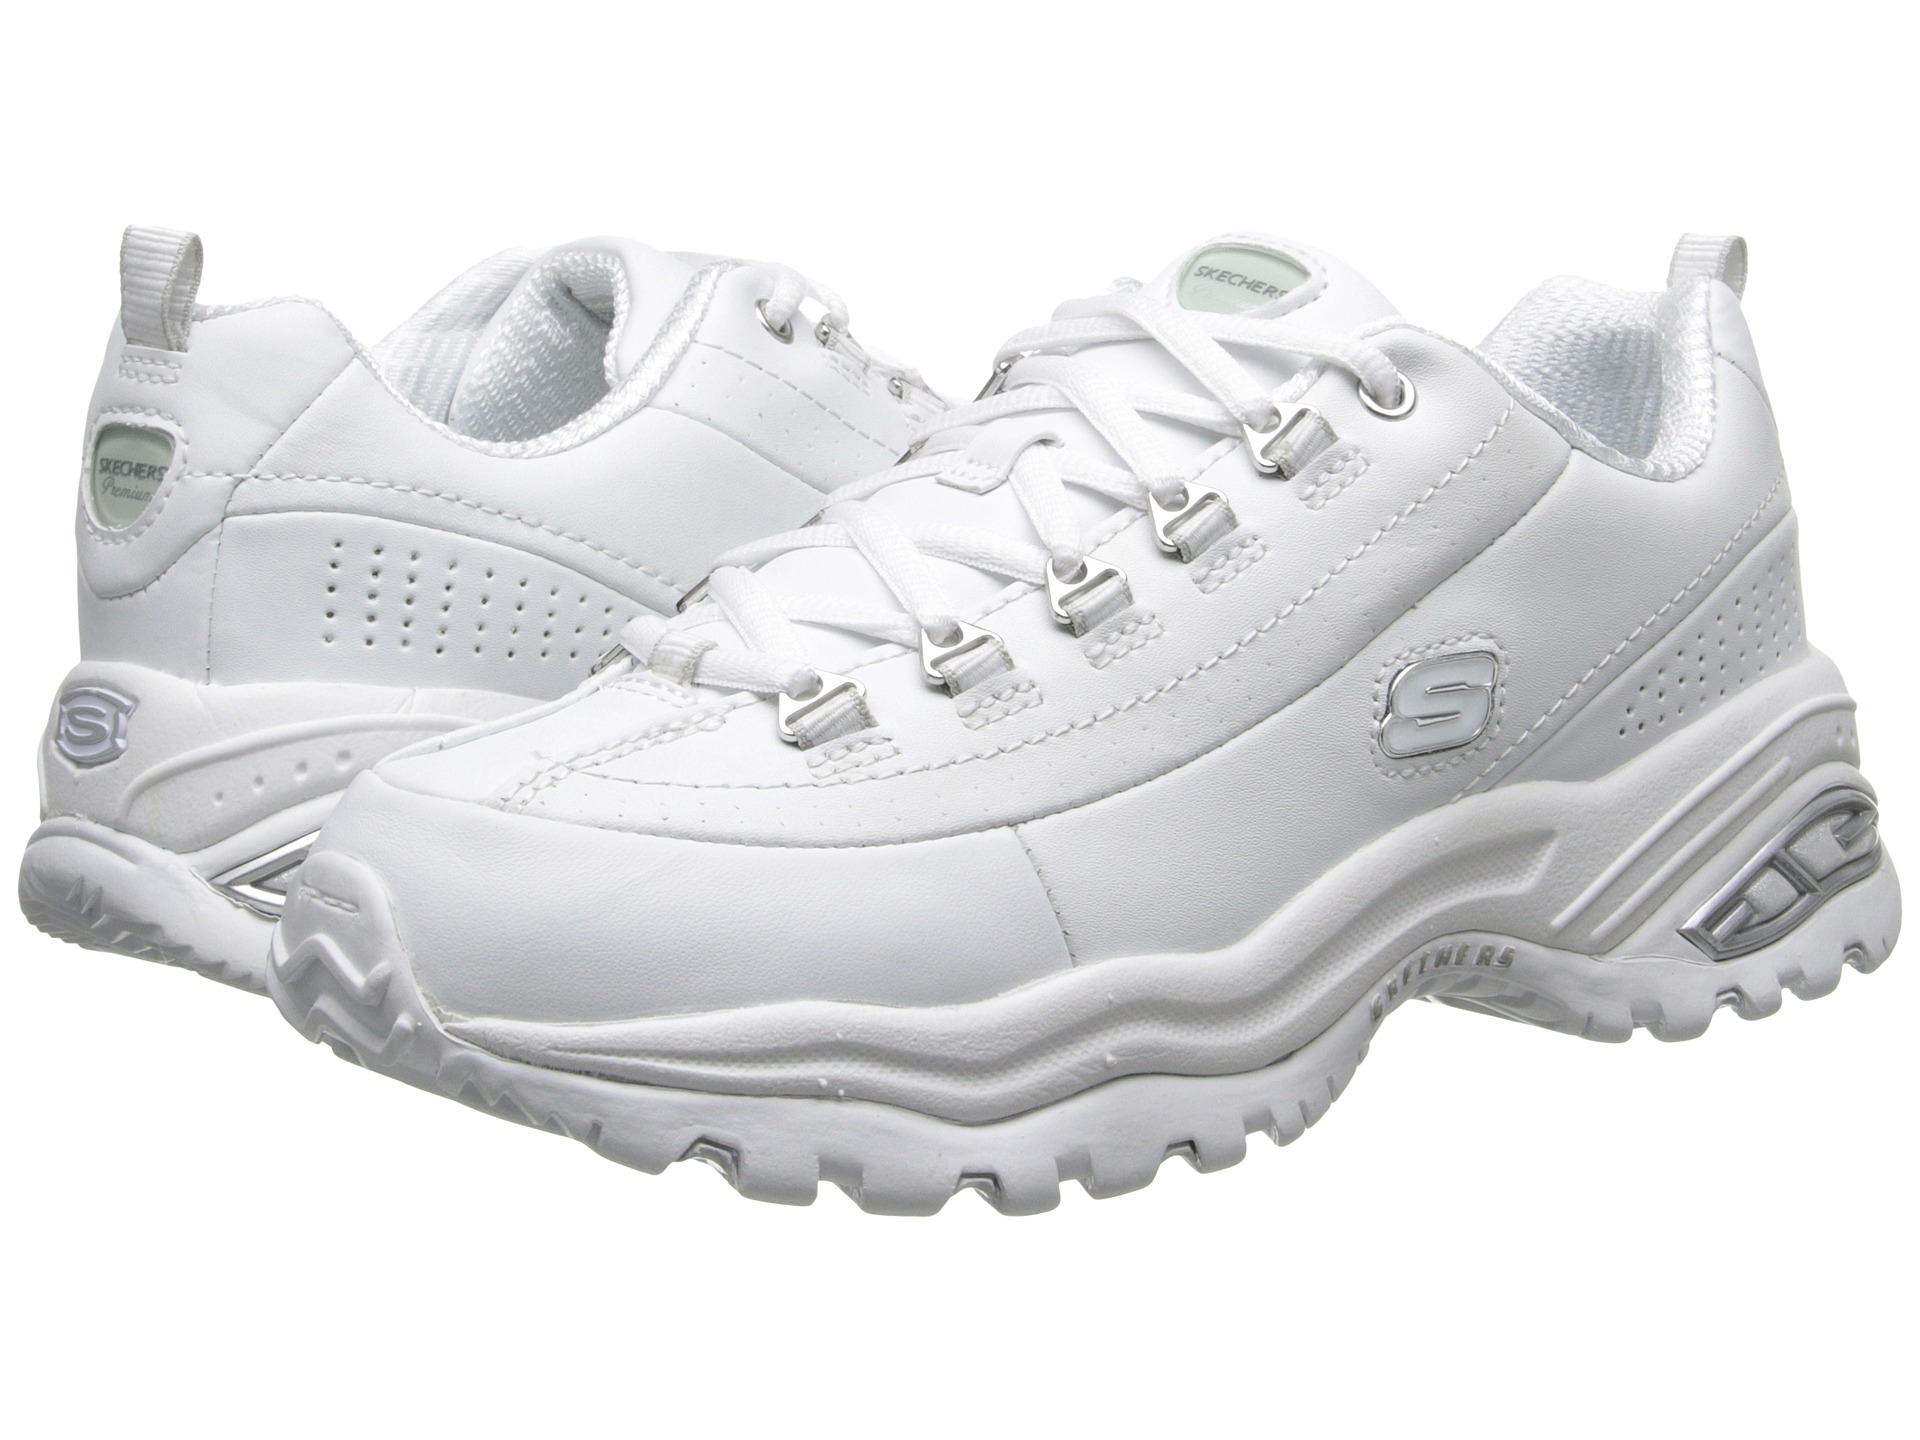 SKECHERS Premiums at Zappos.com